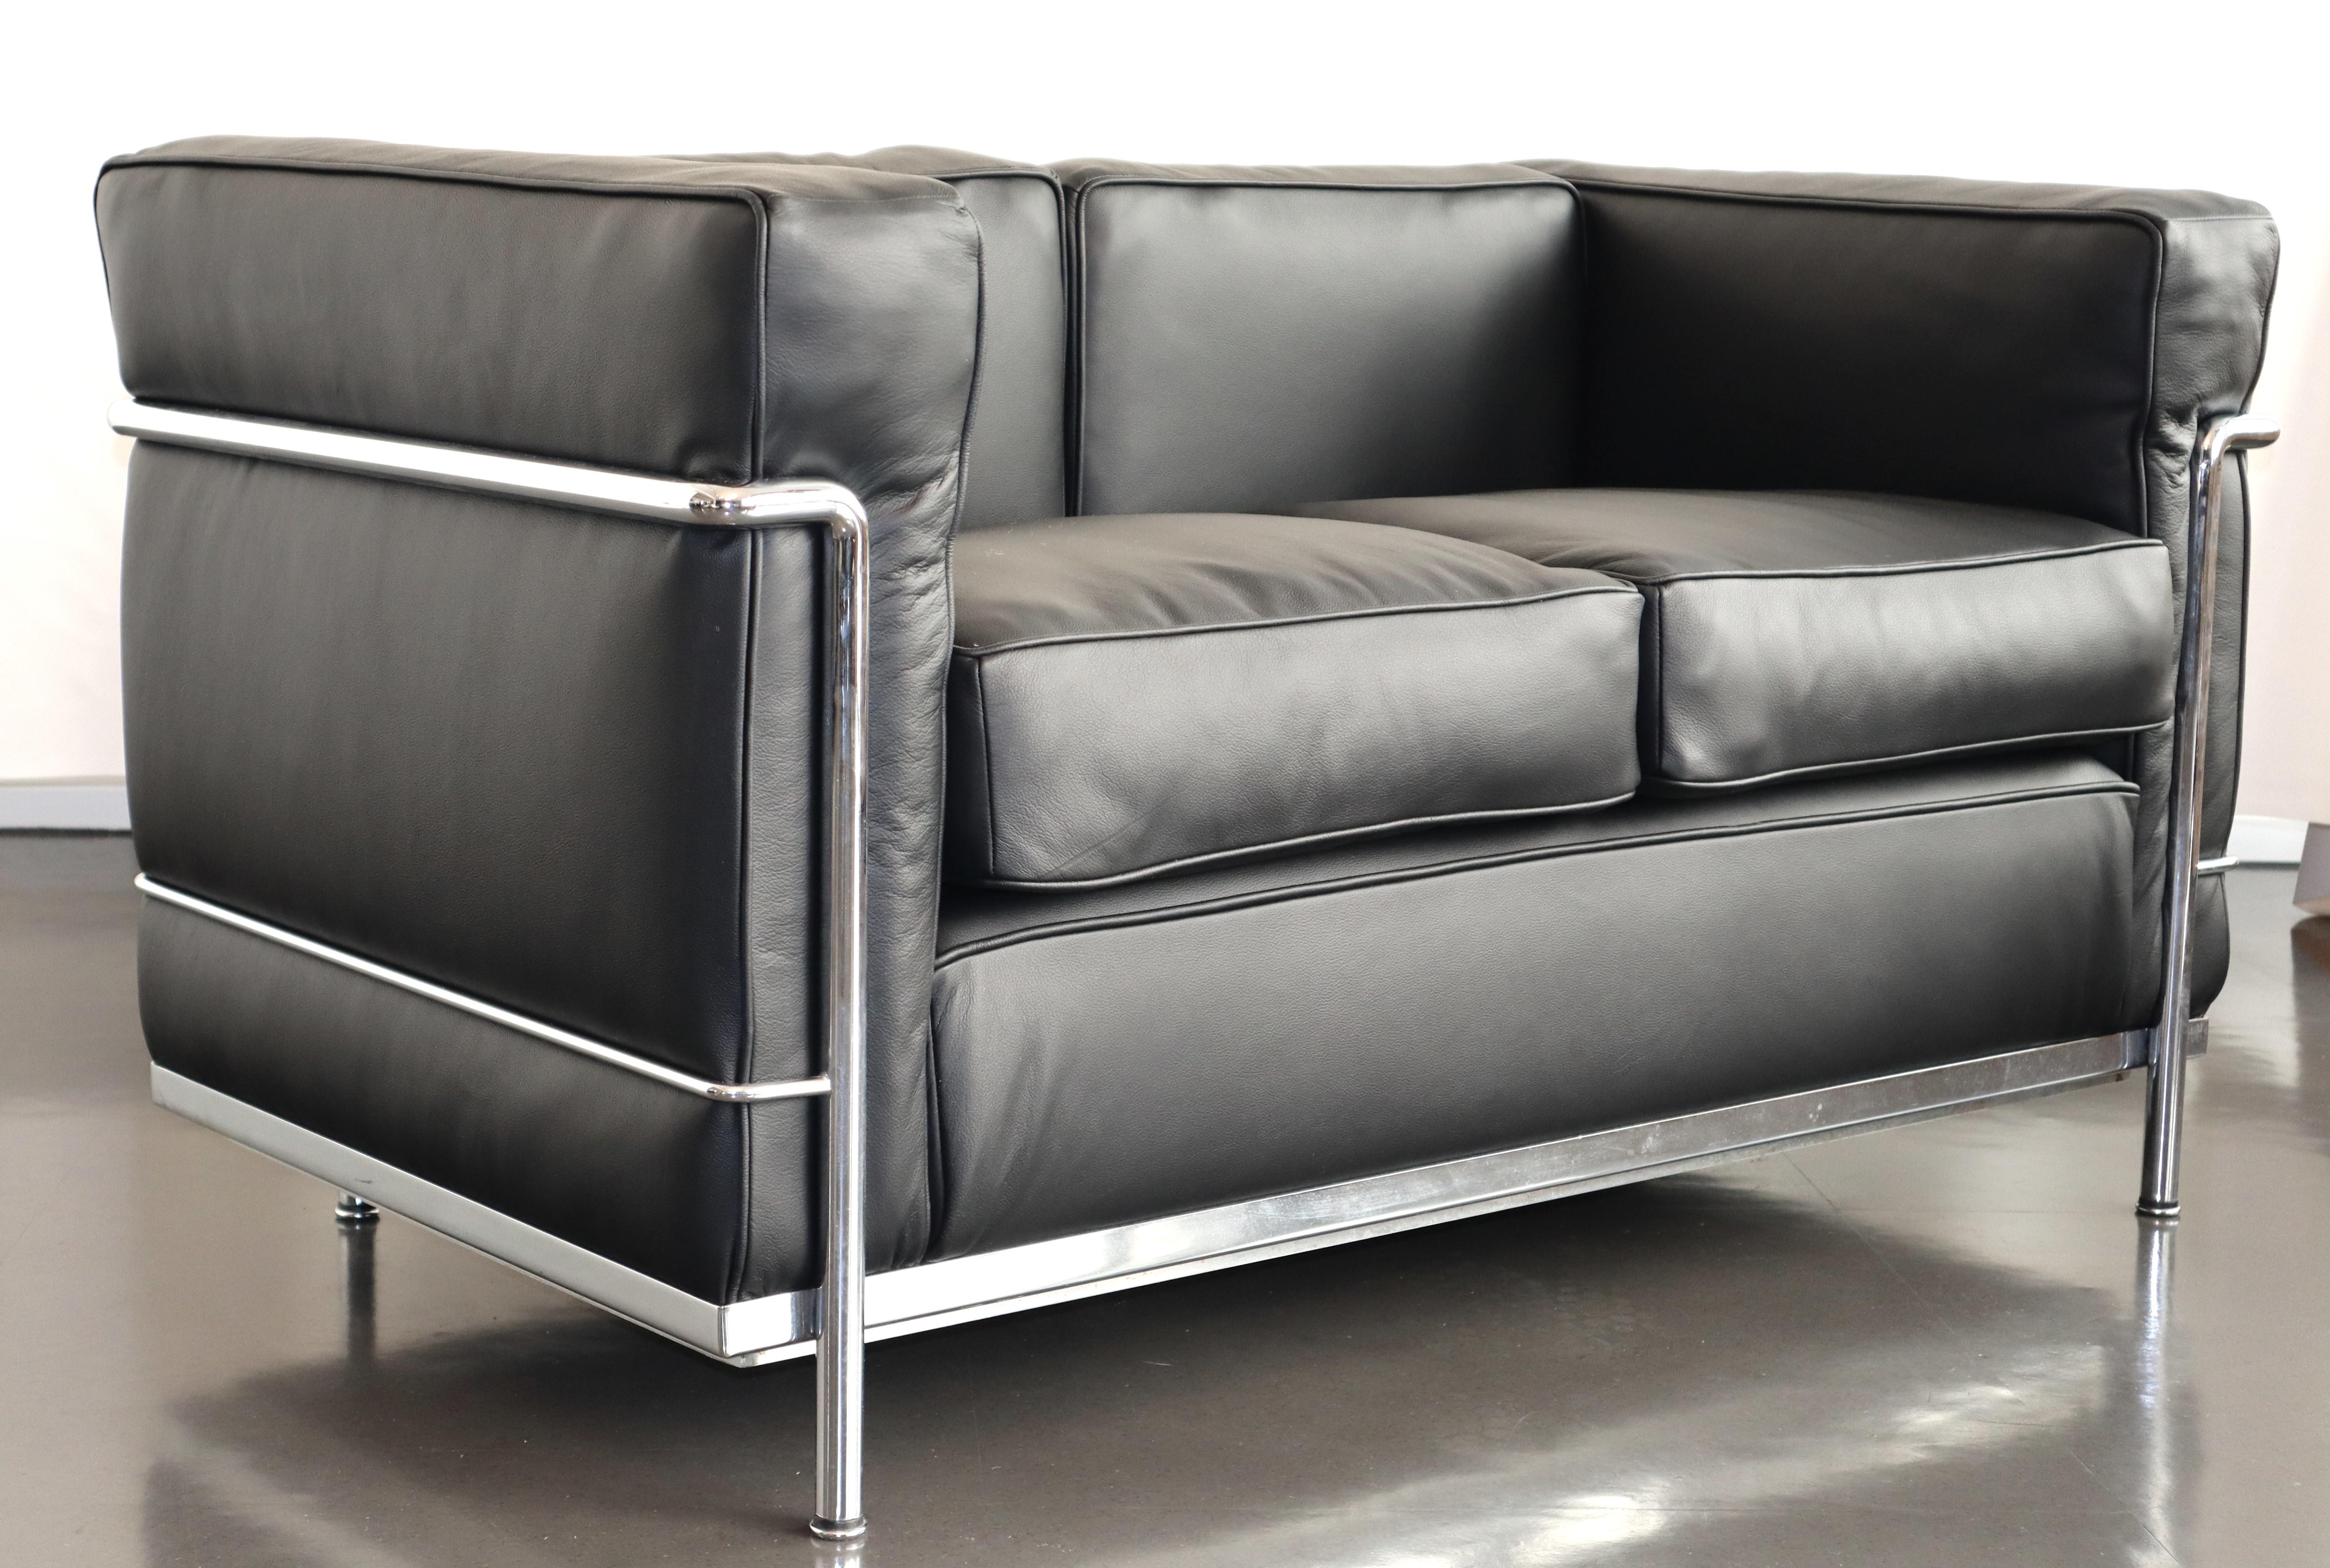 Timelessly iconic Le Corbusier LC2 two-seater sofa in chrome tube steel and black leather. Made in Italy by Cassina. Signed with serial number.

The LC2 was designed in 1928 by Le Corbusier; his cousin and colleague Pierre Jeanneret; and Charlotte